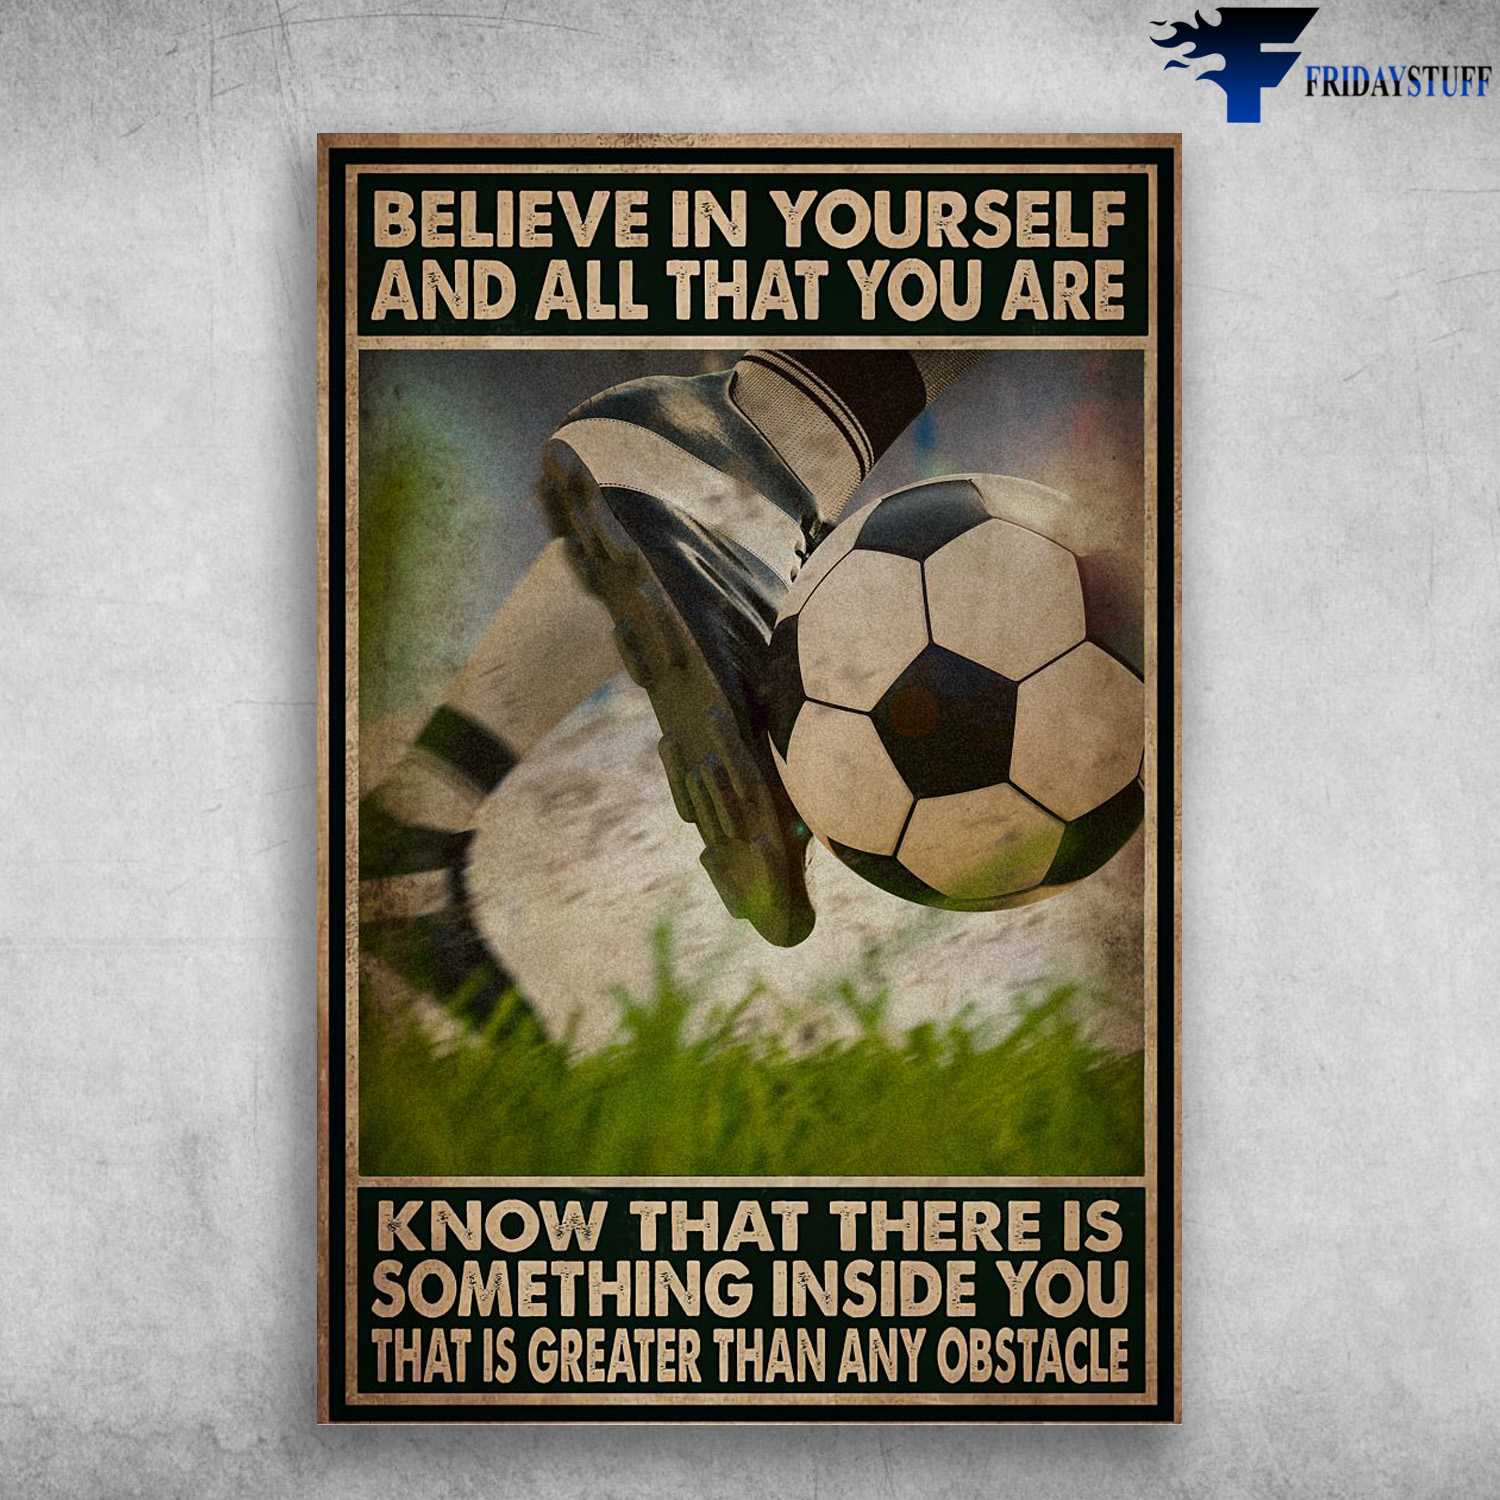 Soccer Player, Soccer Lover, Believe In Yourself, And All That You Are, Know That There Is Somethong Inside You, That Is Greater Than Any Obstacle